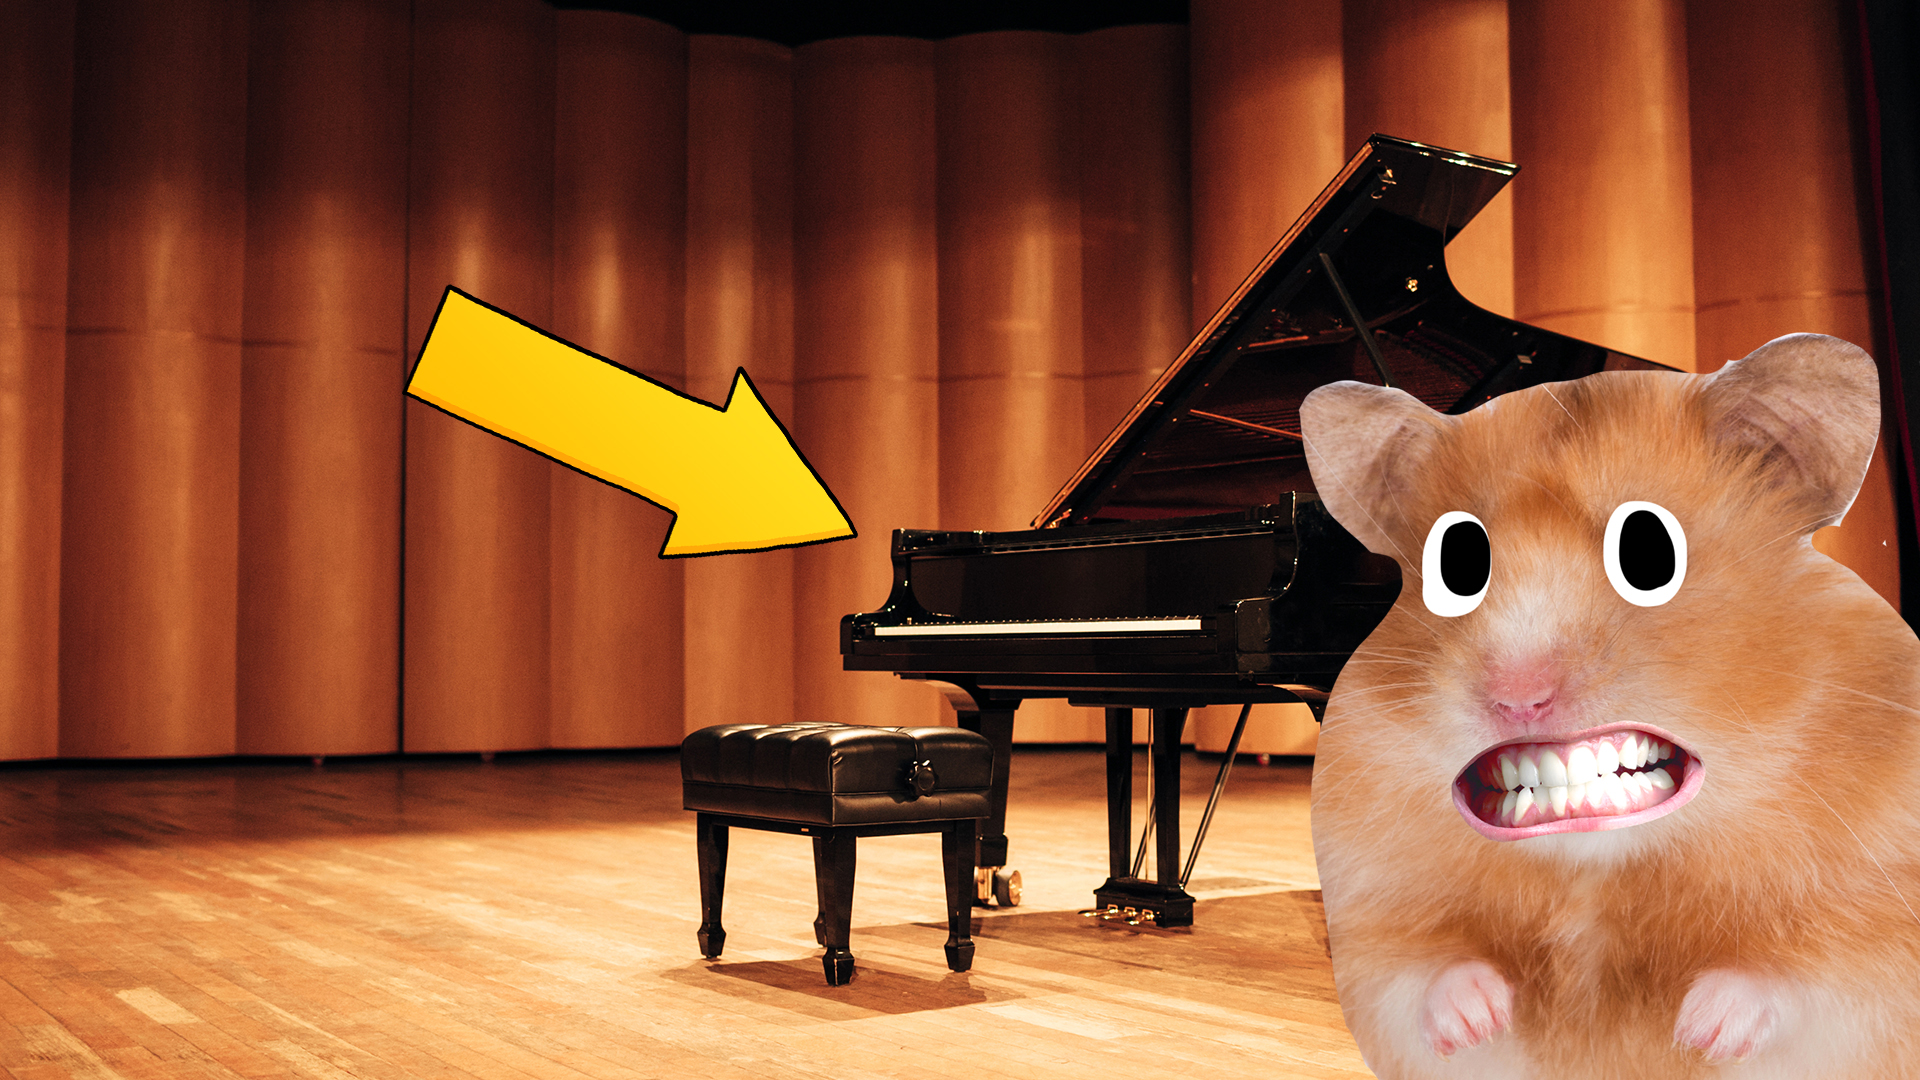 A hamster and a piano